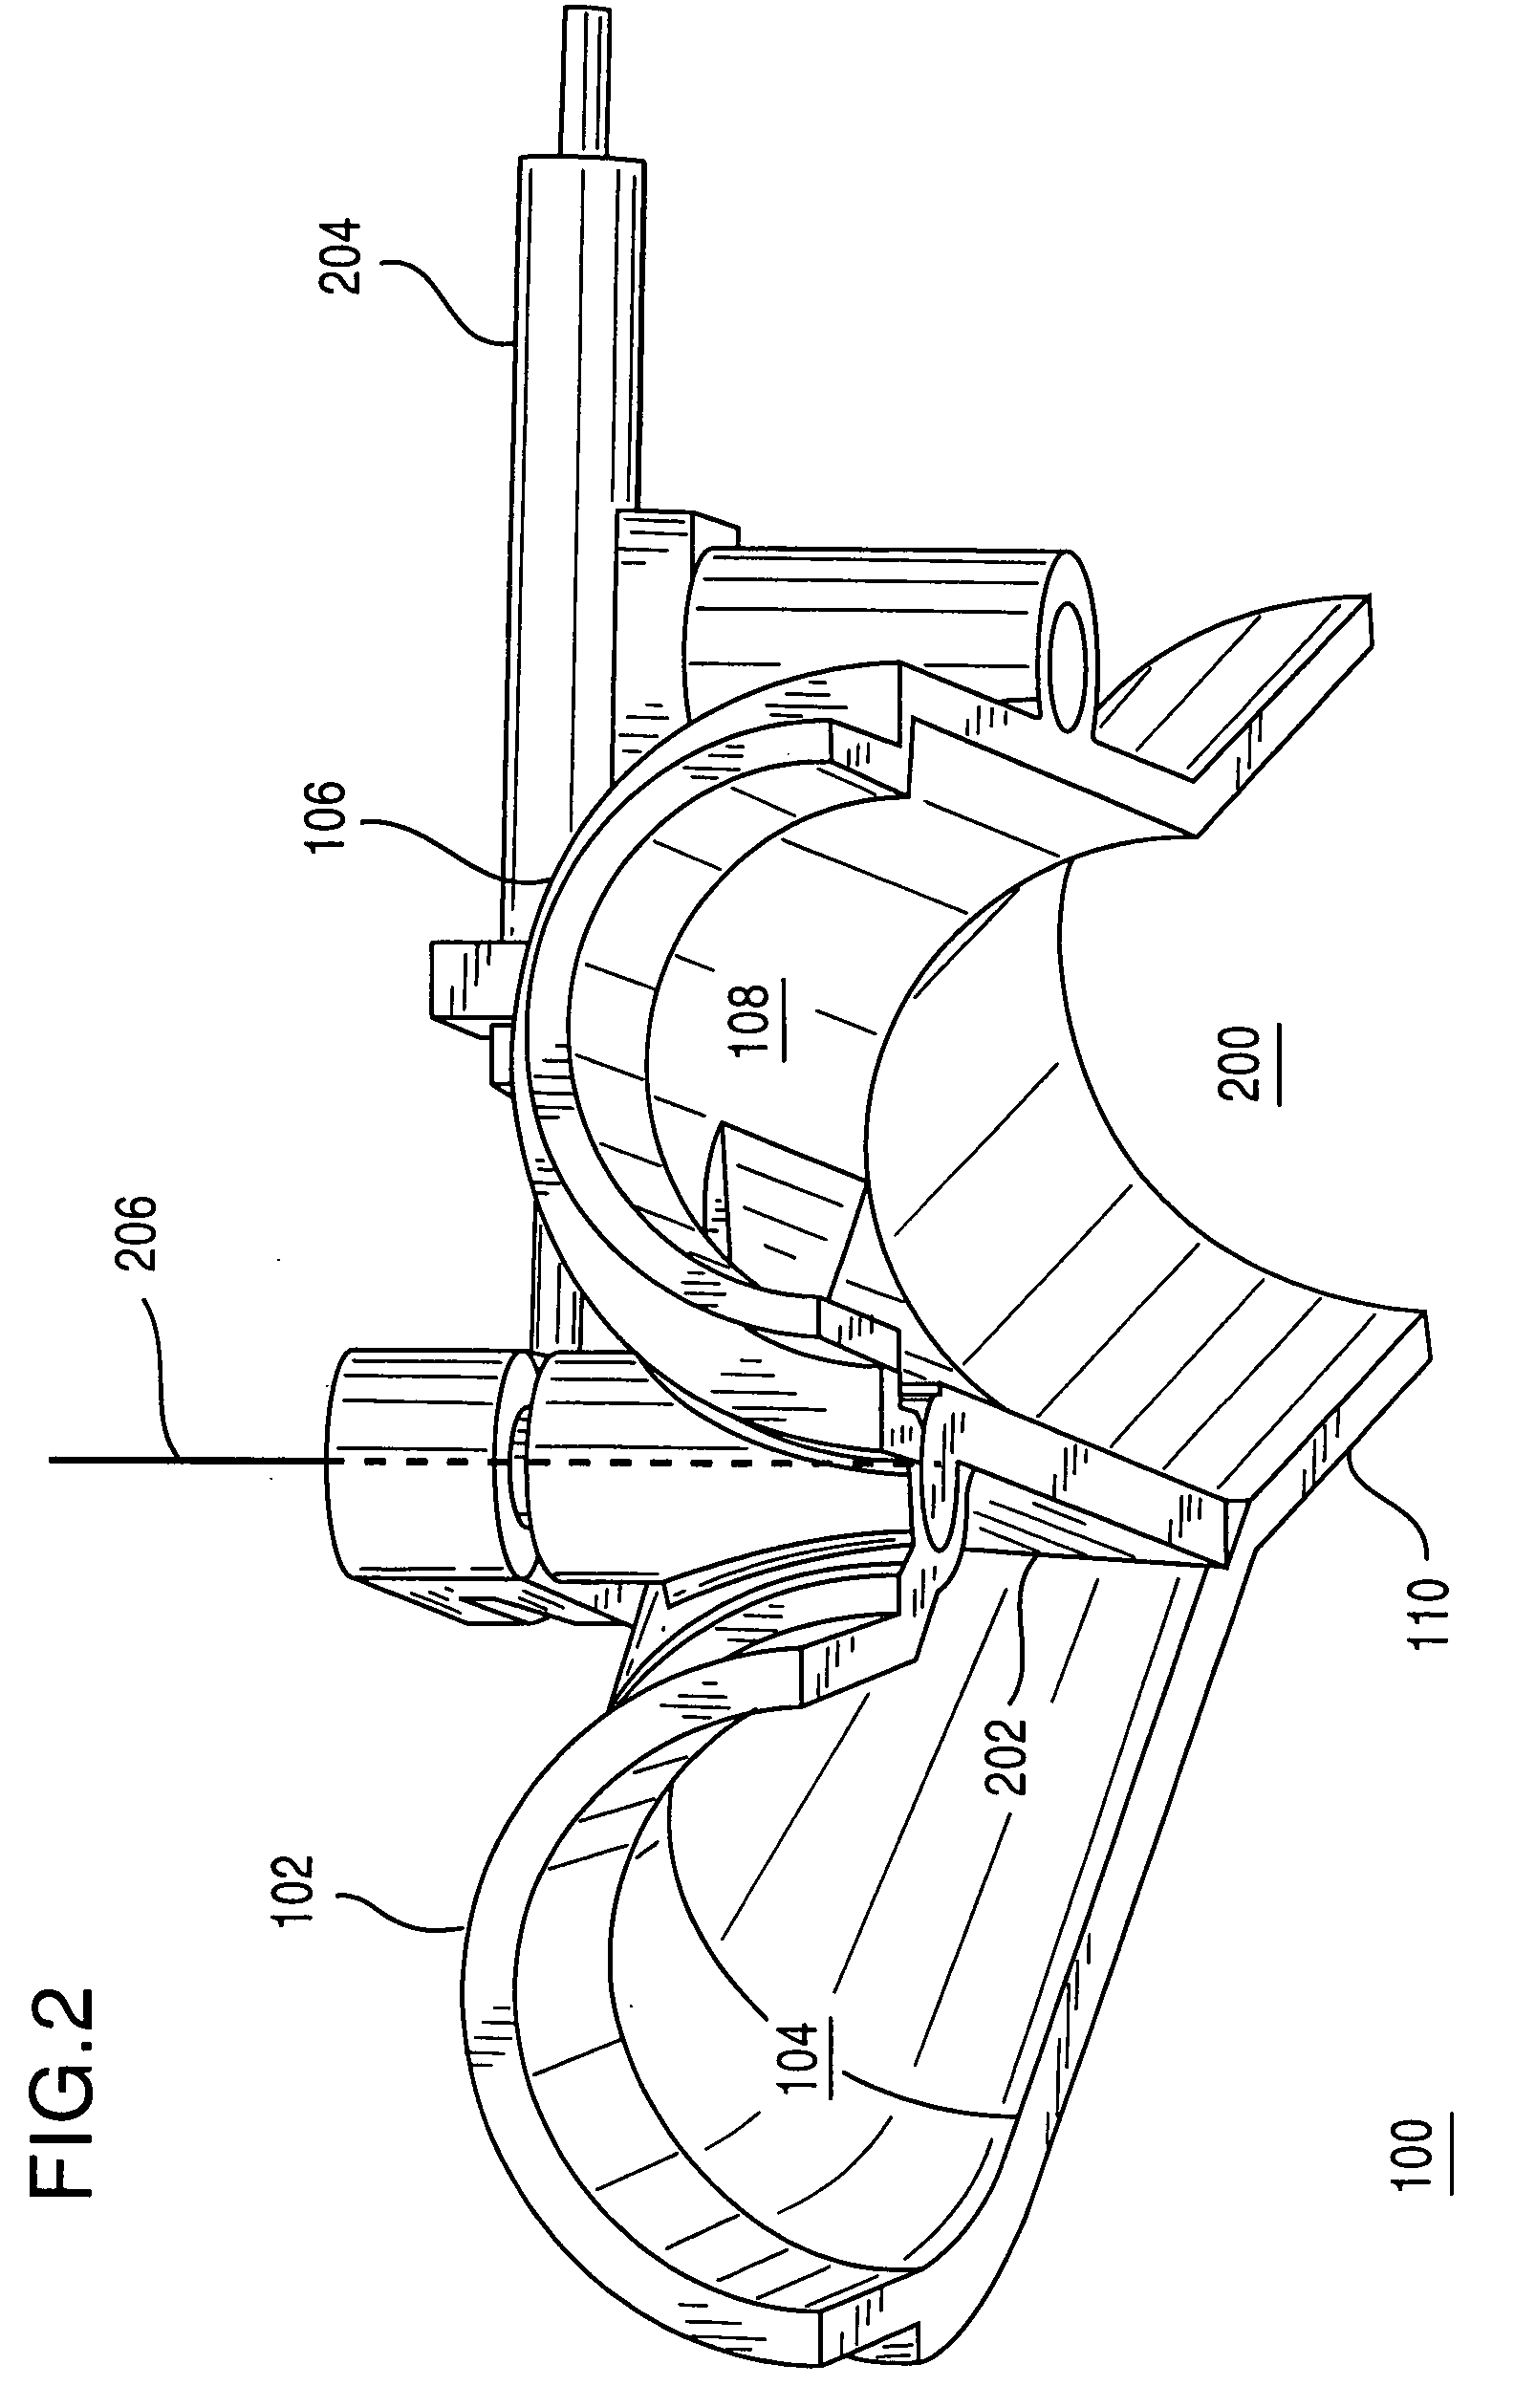 Changeover valve and dual air supply breathing apparatus